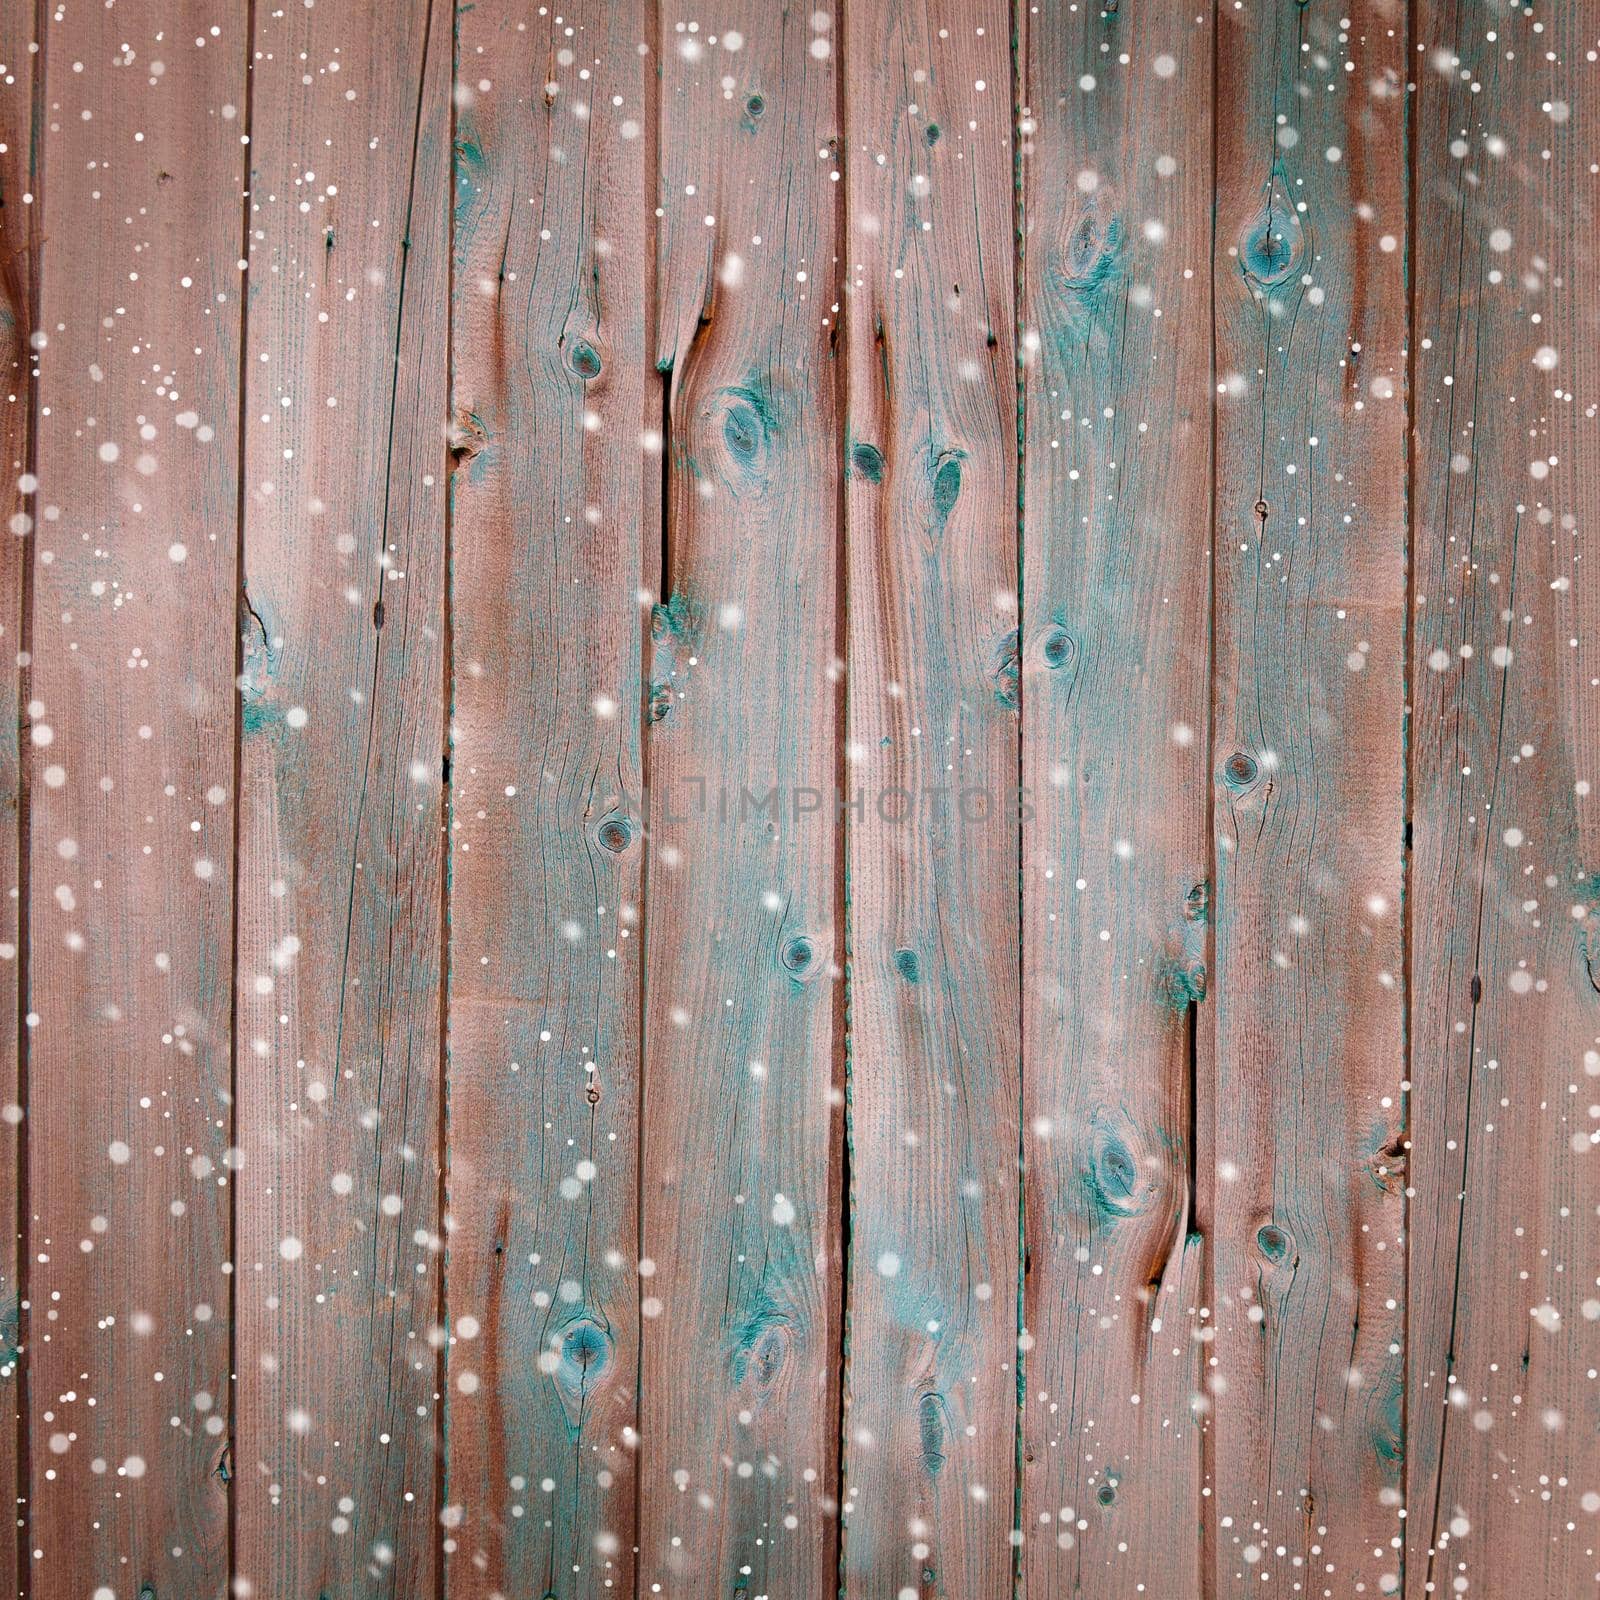 Winter wood background with snowflakes by kisika